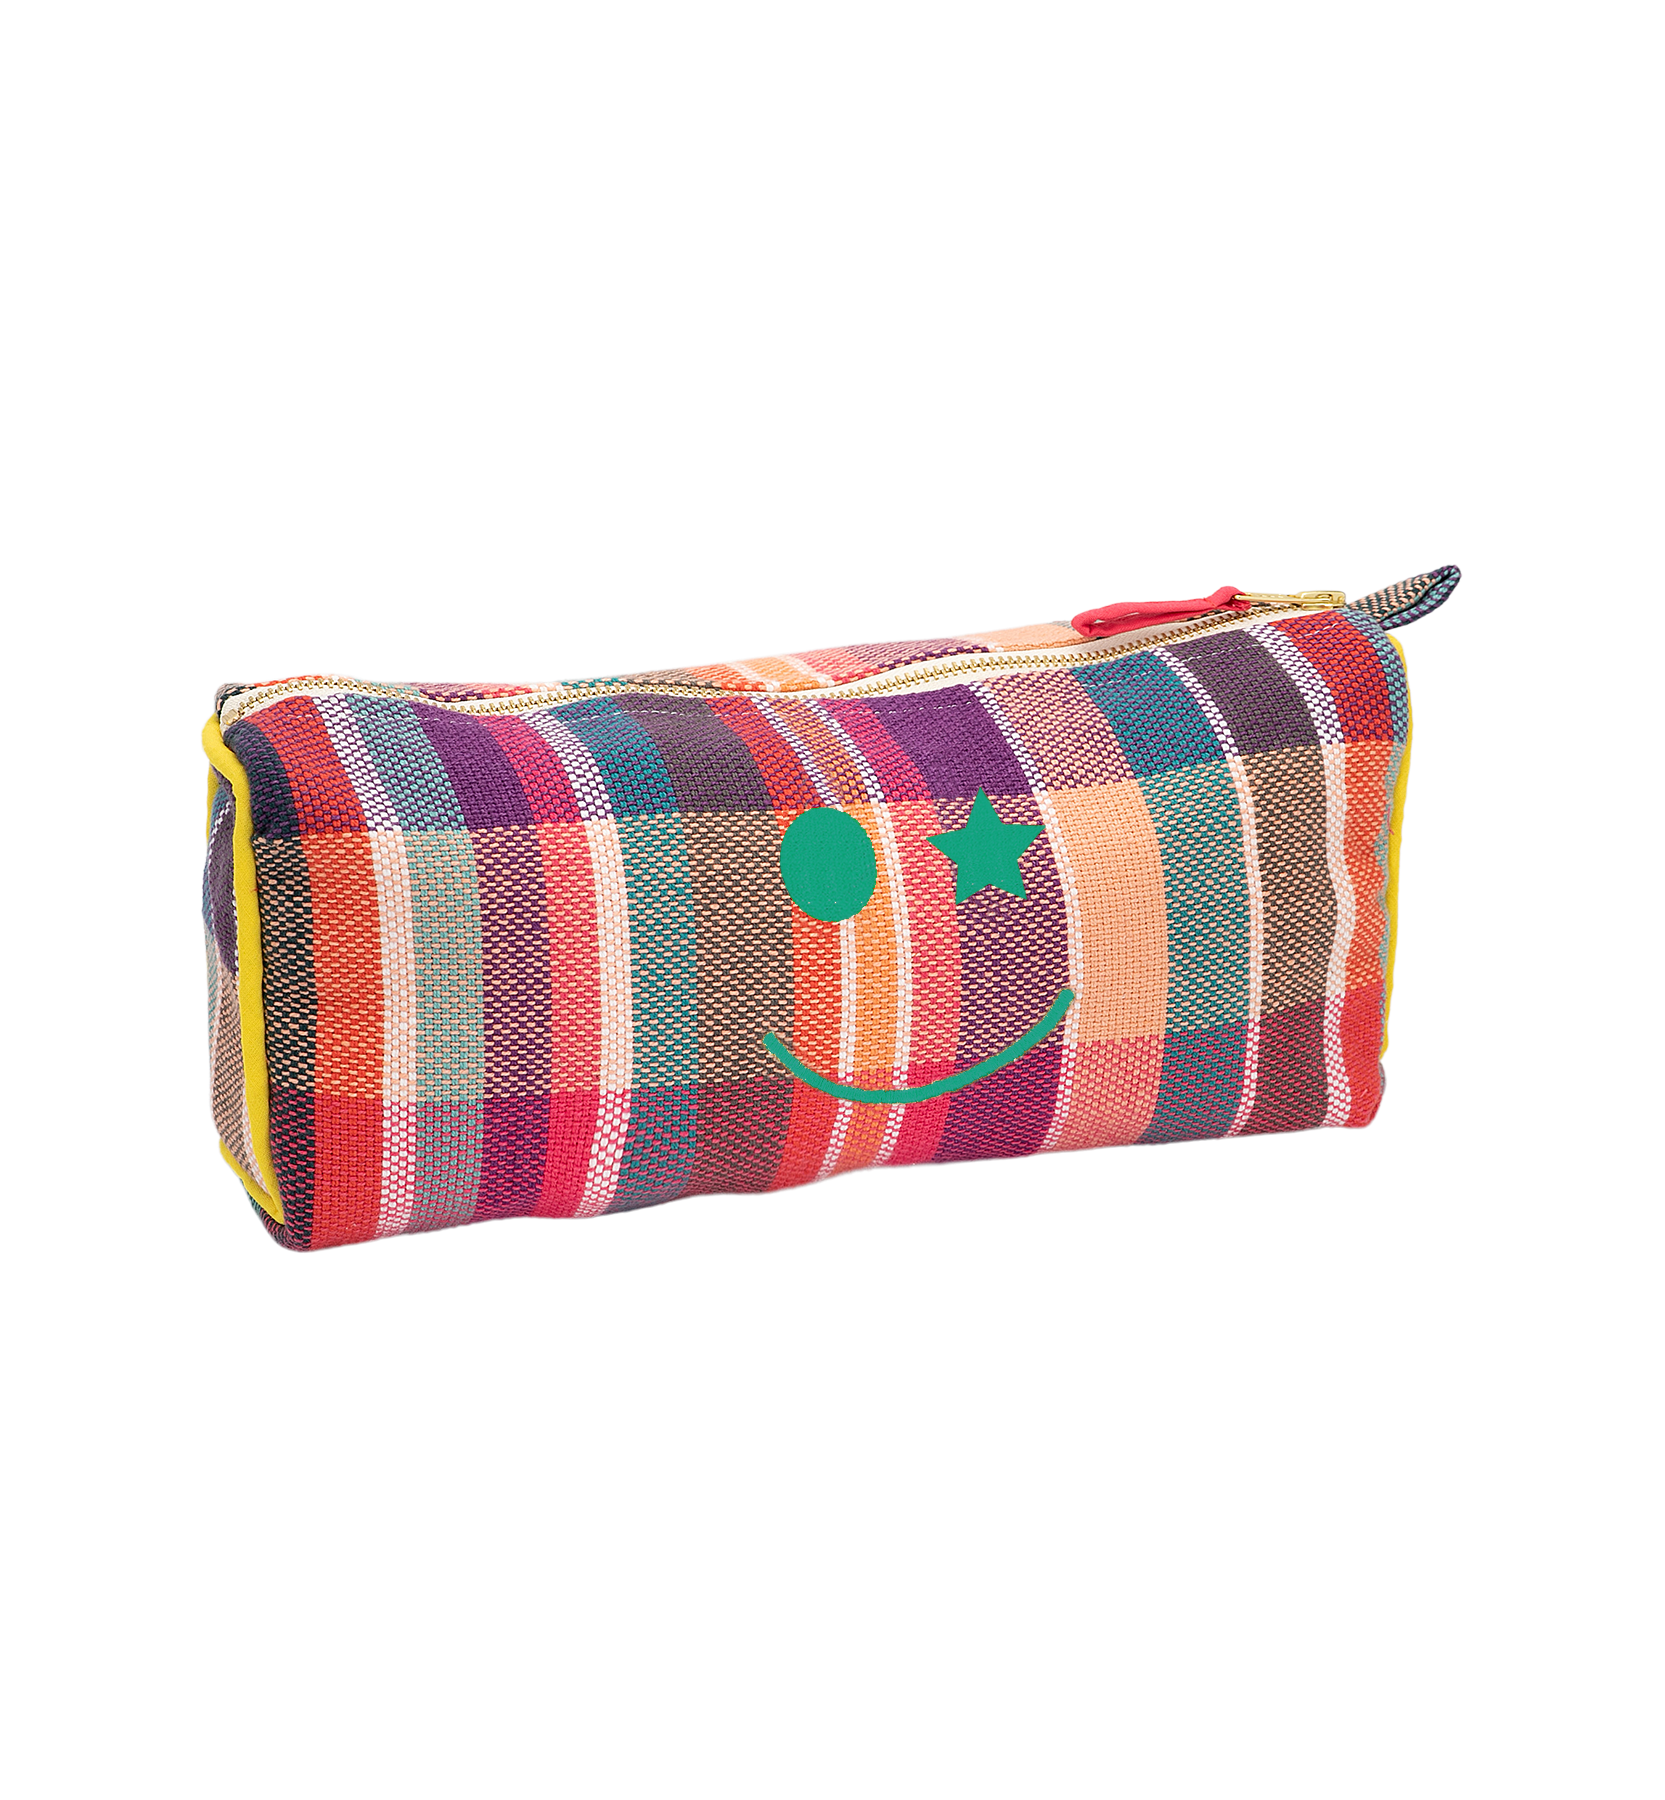 Embroidered Happy Smile plaid wash bag